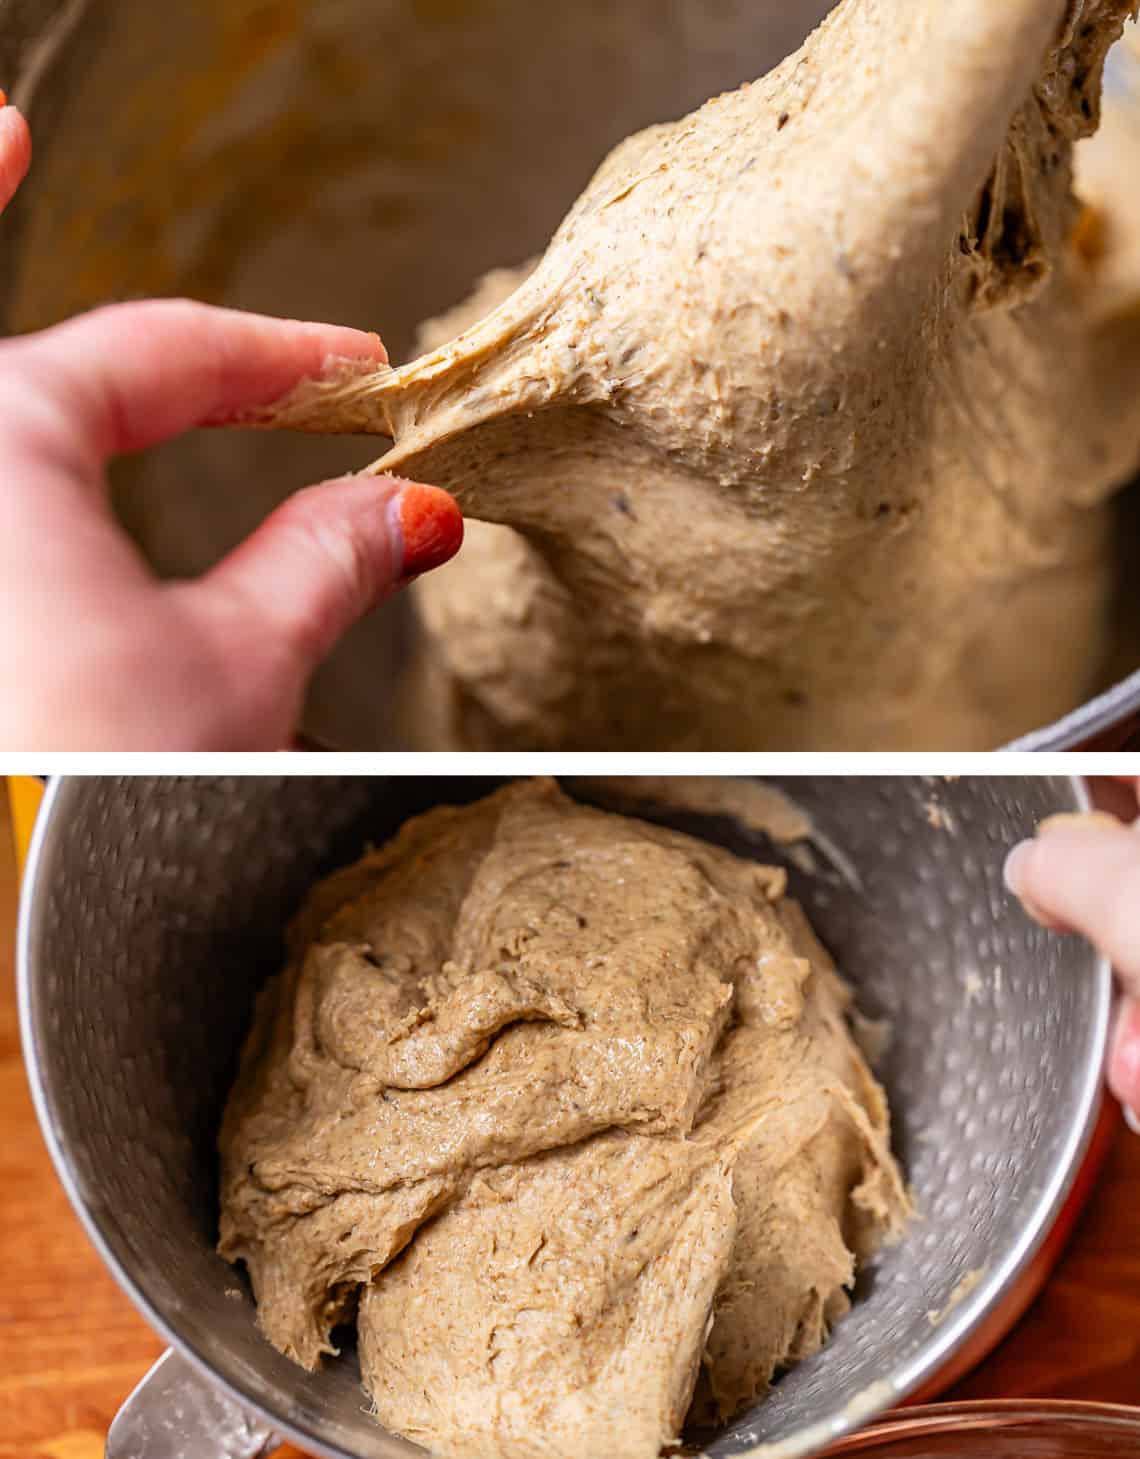 top fingers pulling at a sticky dough in the mixing bowl, bottom sticky dough in mixer.